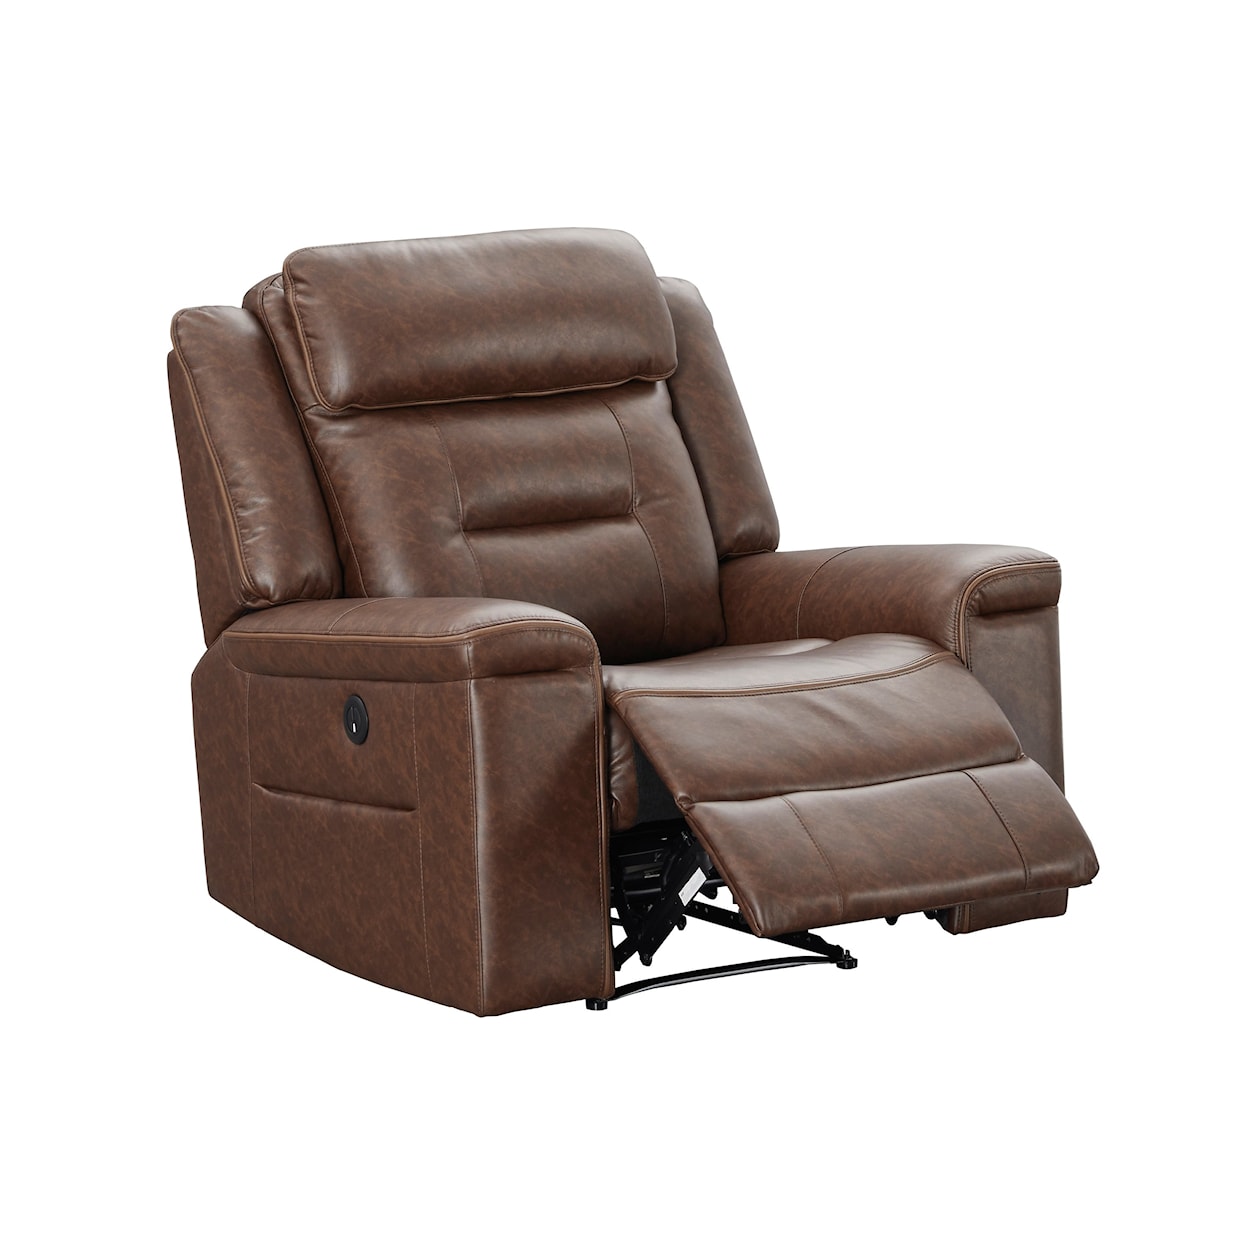 Signature Design by Ashley McAdoo Power Recliner